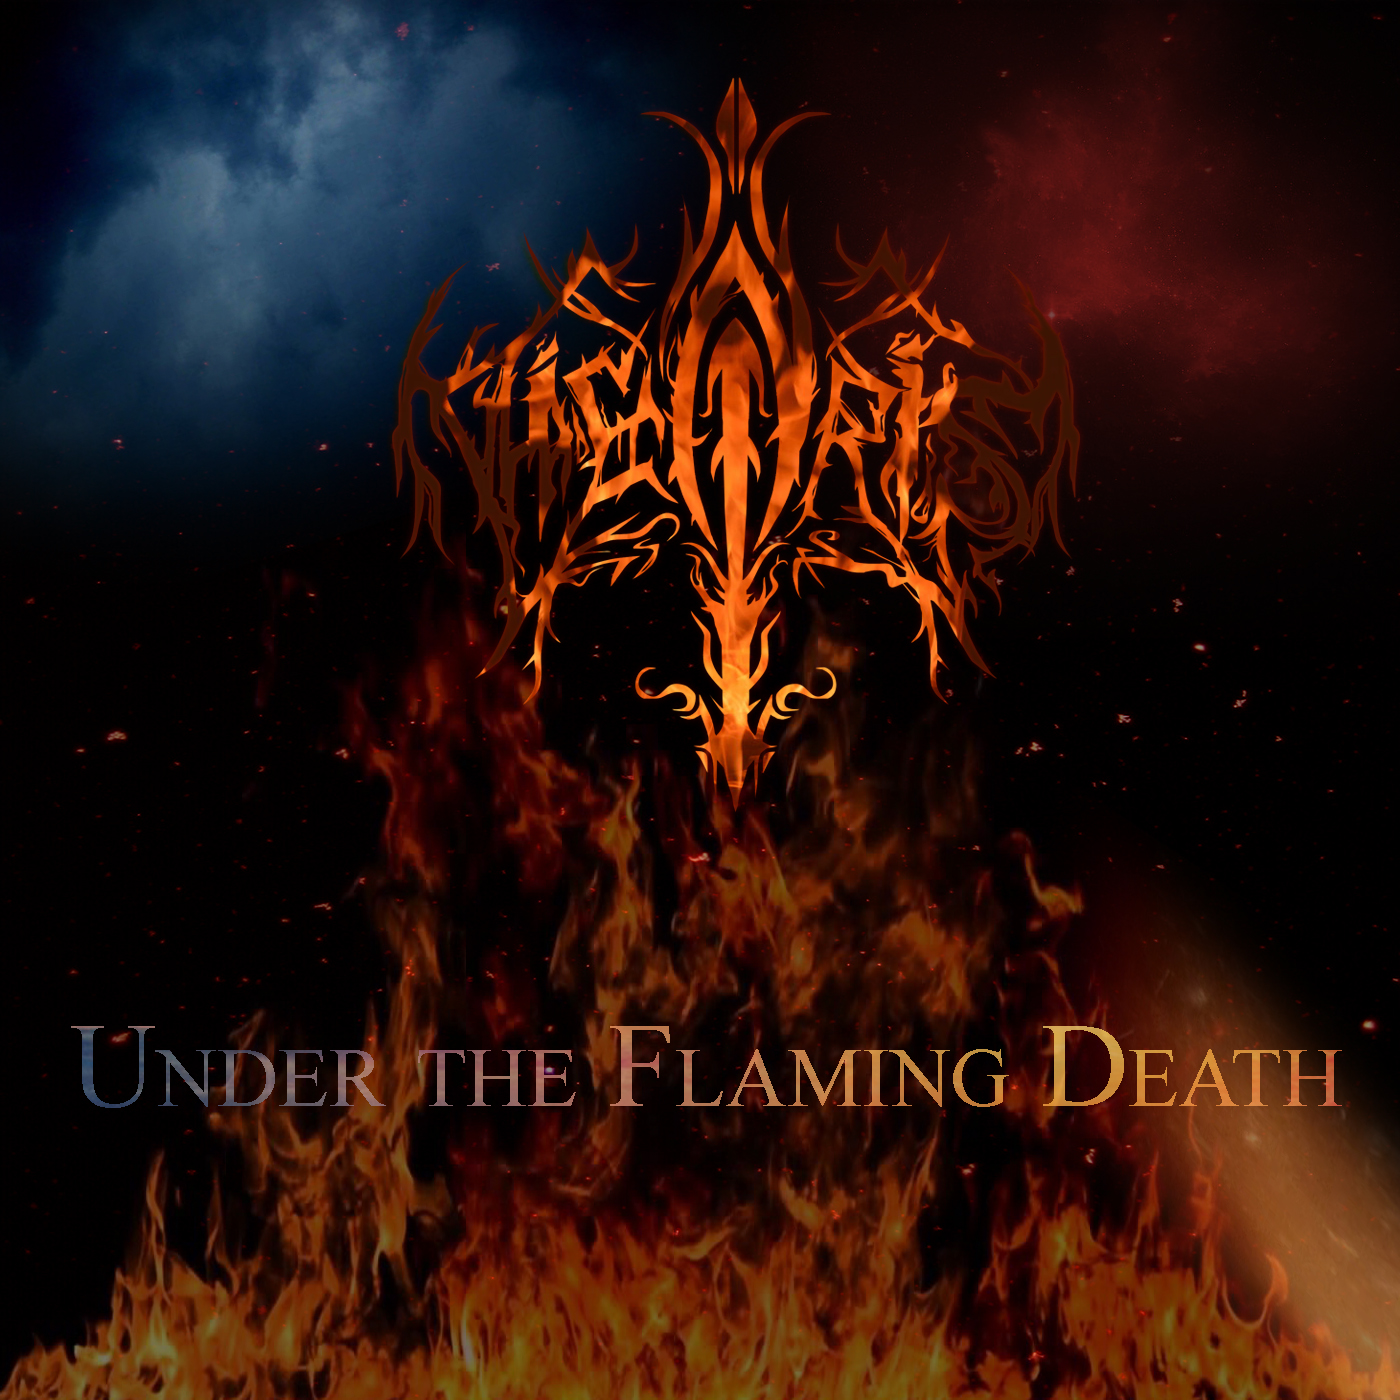 Under the Flaming Death